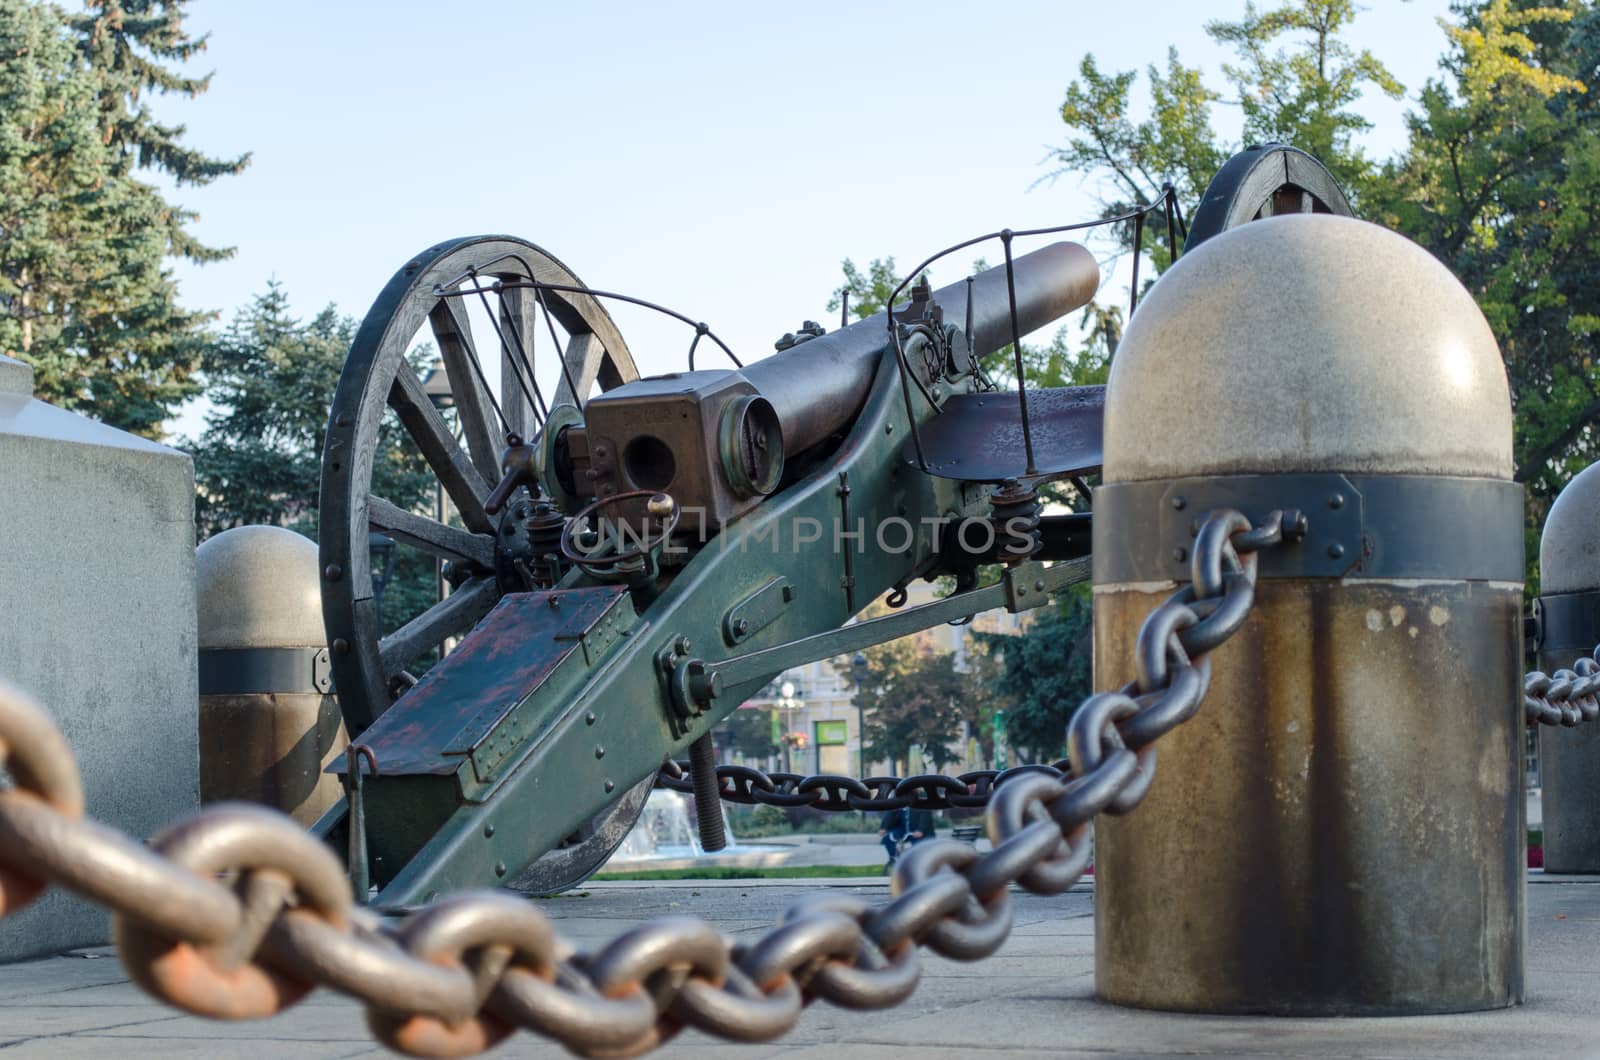 Still-life engineering and technical equipment - close-up and detail Cannon